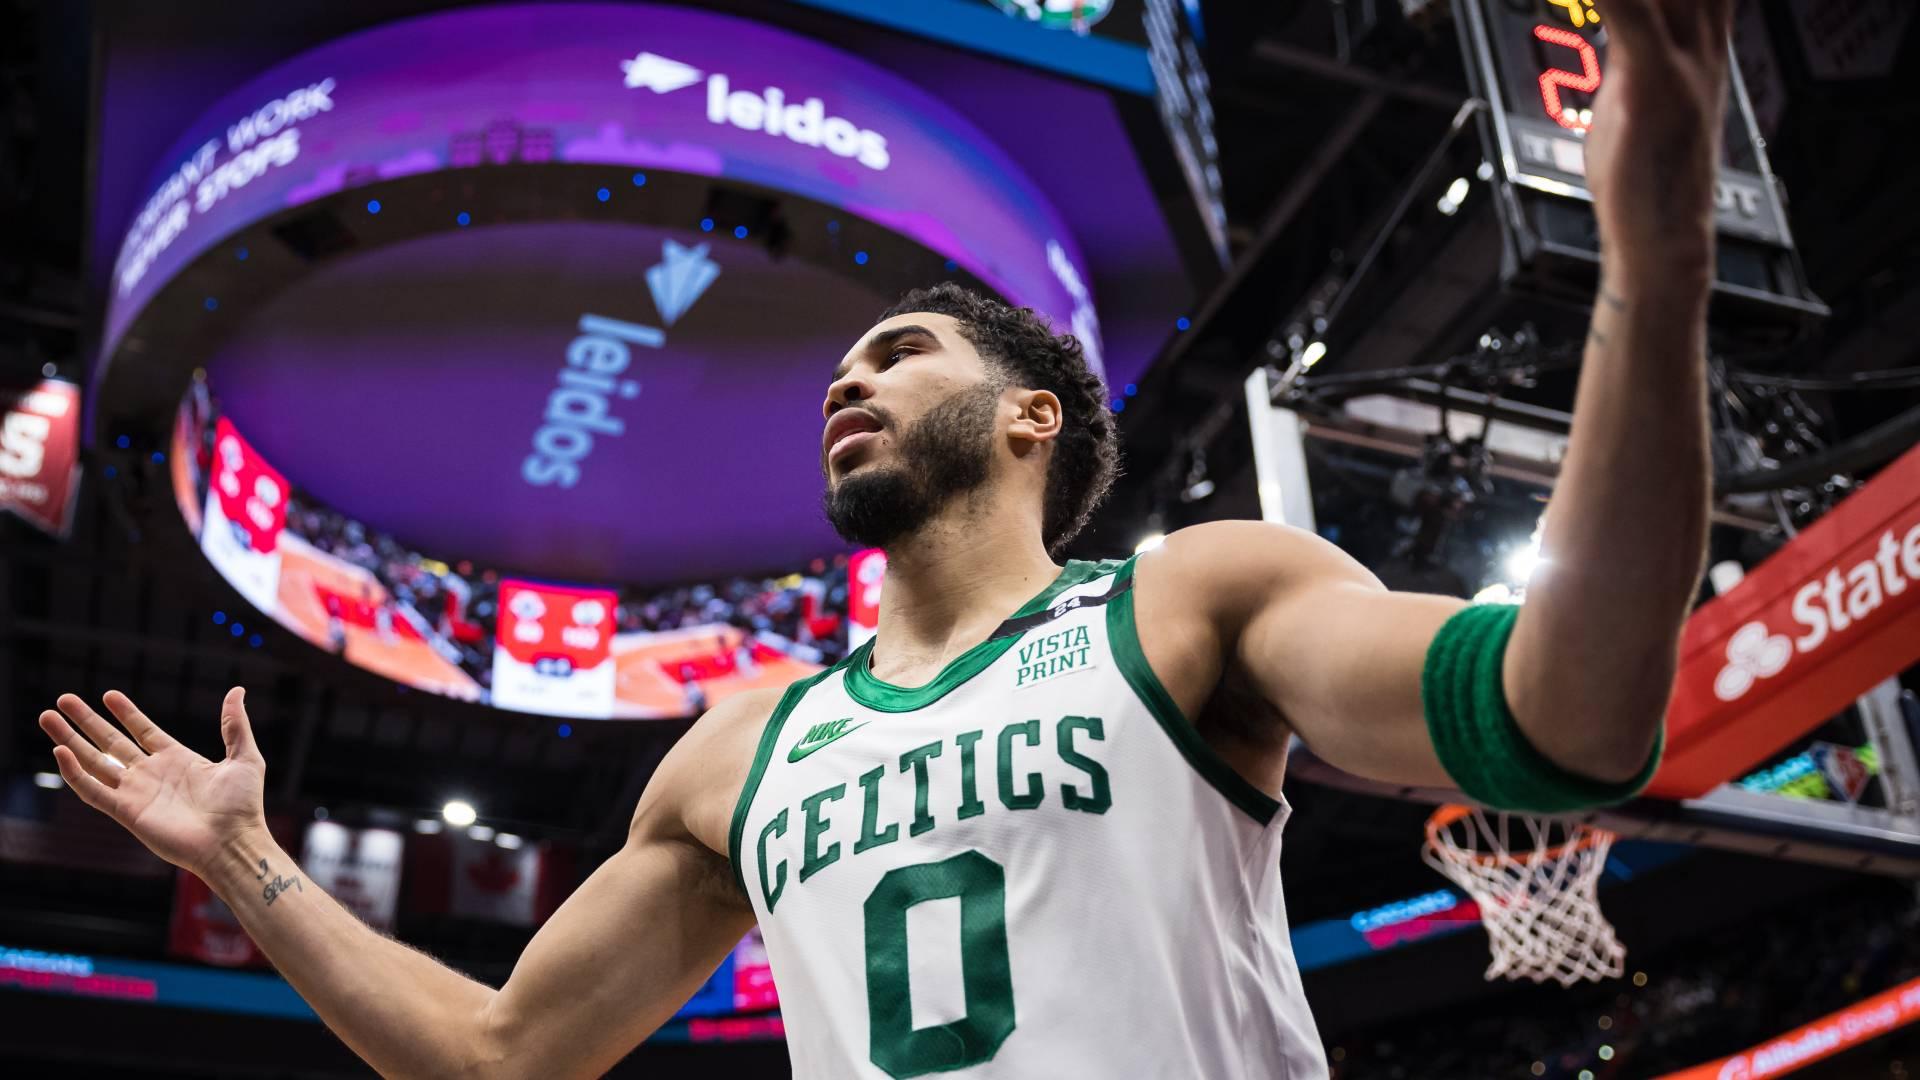 NBA All Star Moment Of The Night: Celtics' Jayson Tatum Emerges From Slump With 51 Point Outburst